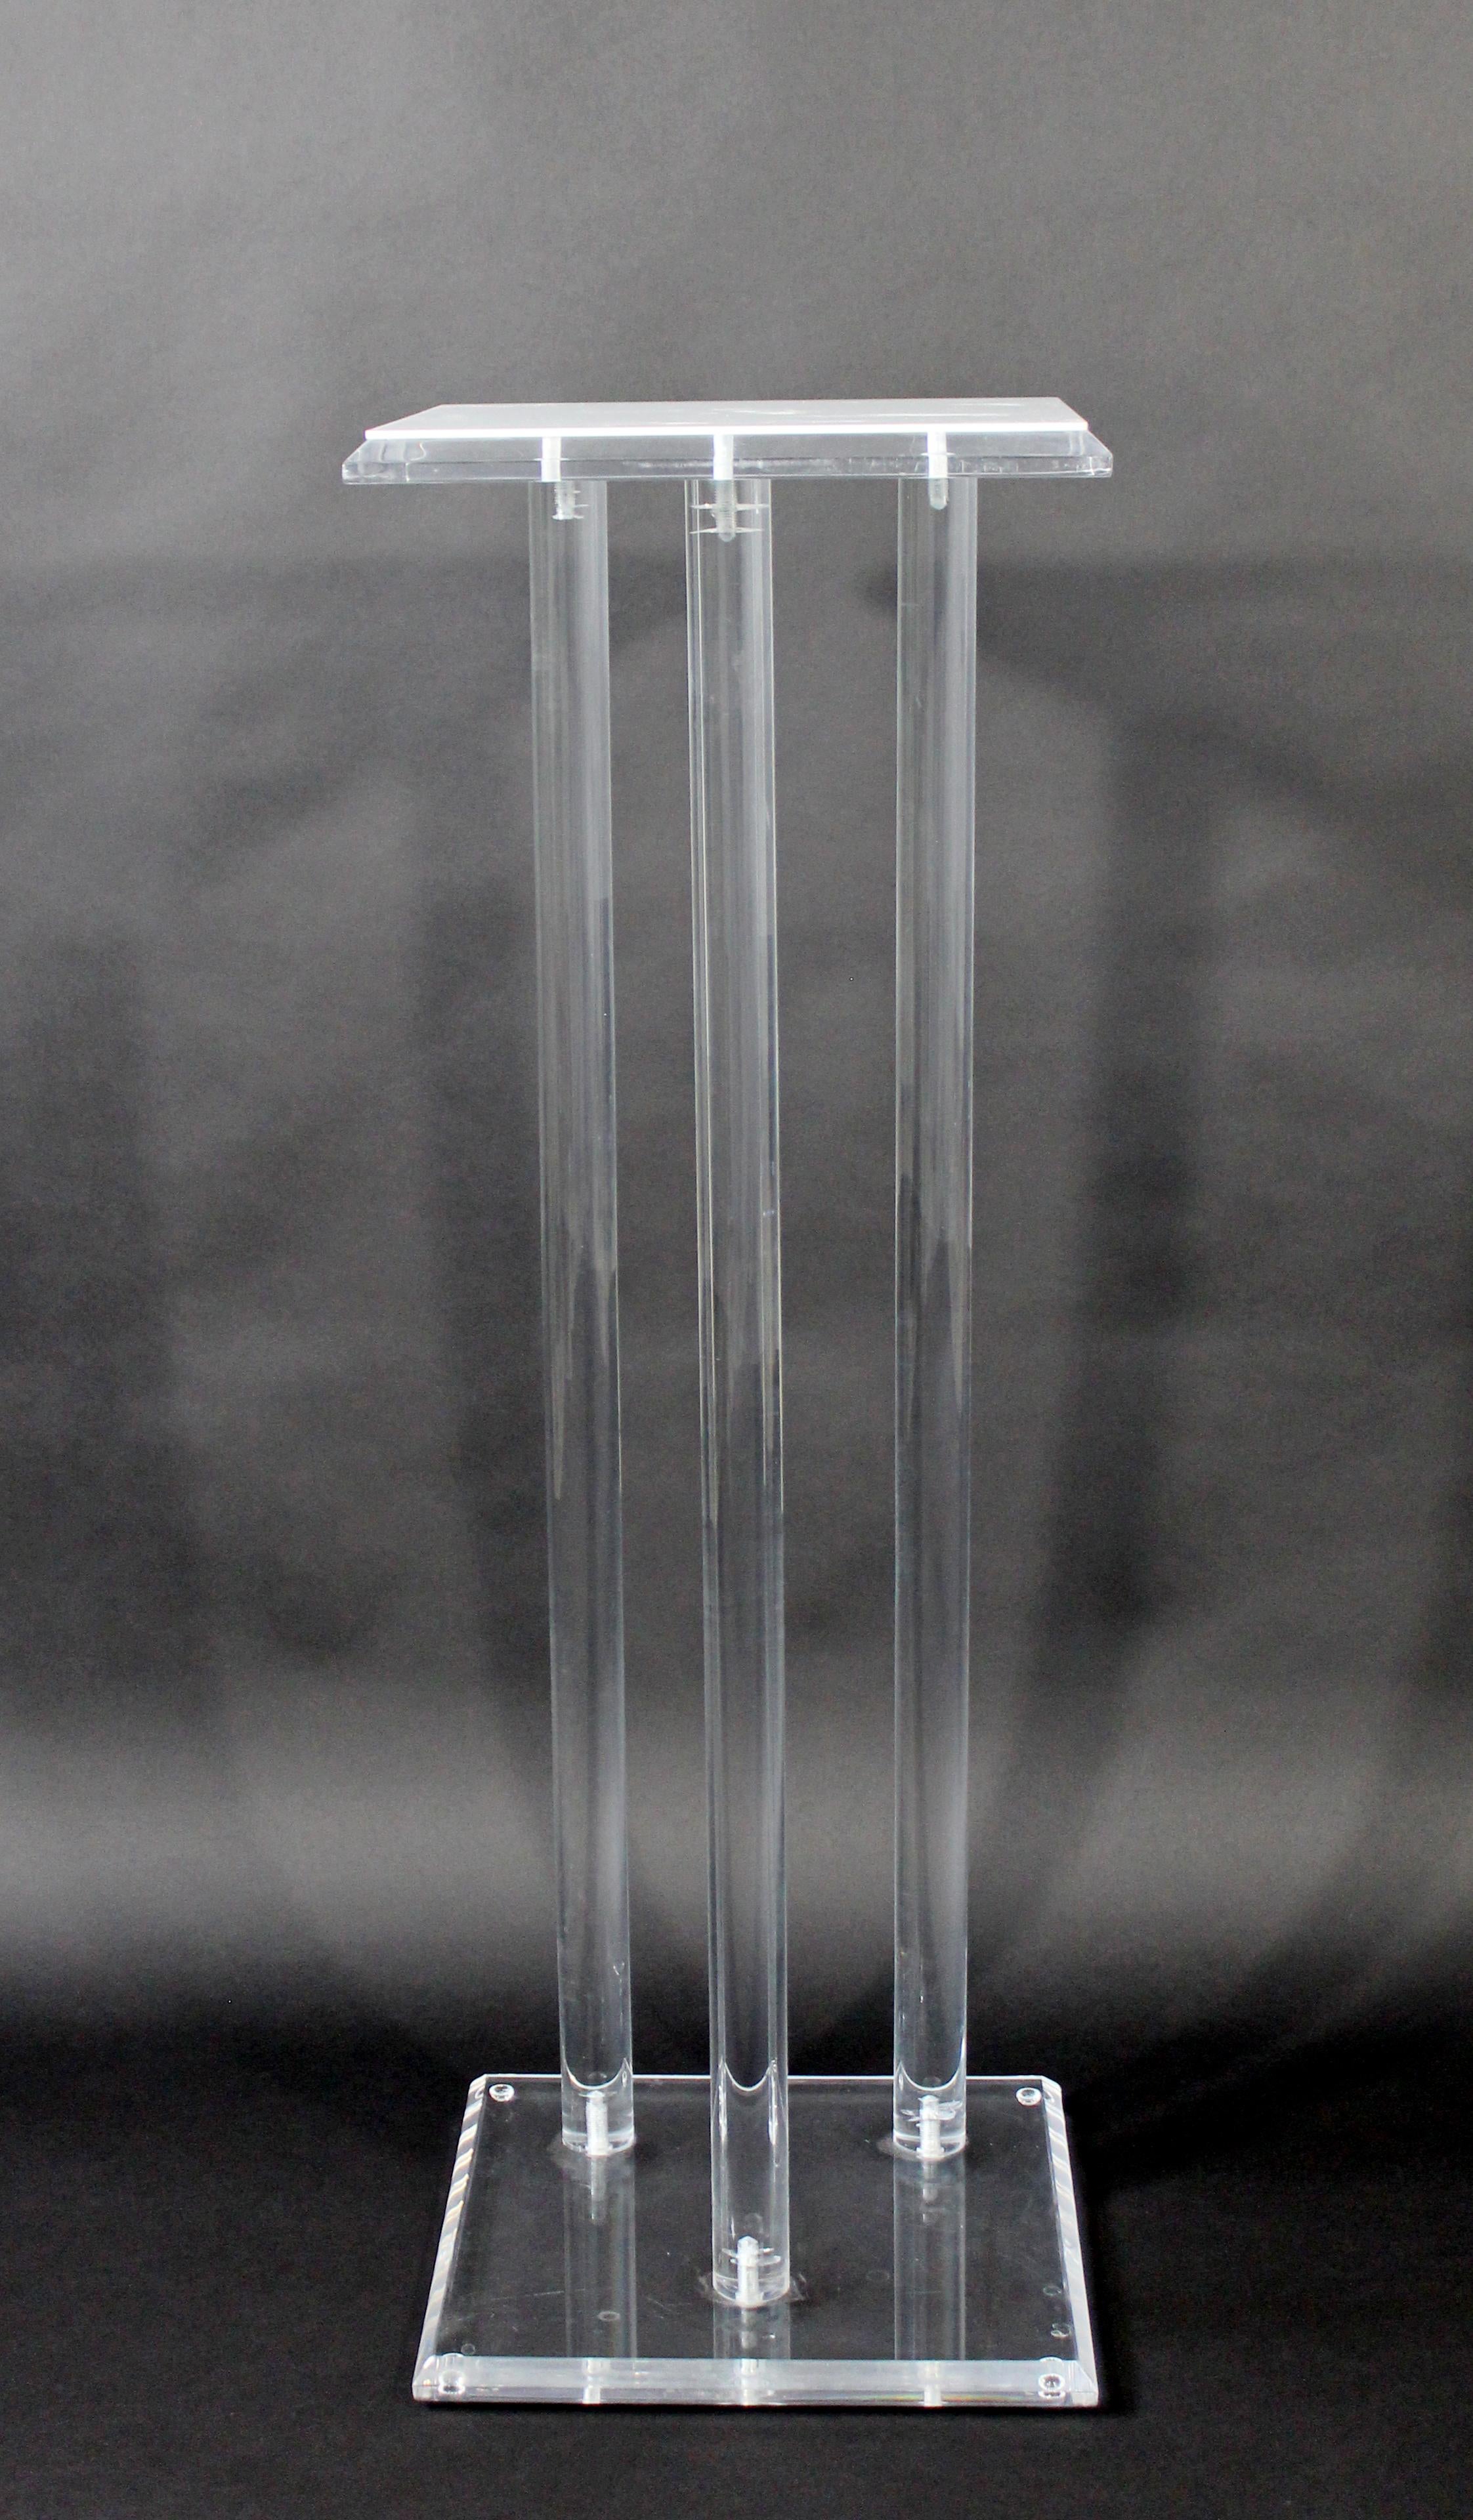 For your consideration is a fantastic, tall and square display pedestal, made of white and clear Lucite or acrylic, circa 1970s. In excellent vintage condition. The dimensions are 13